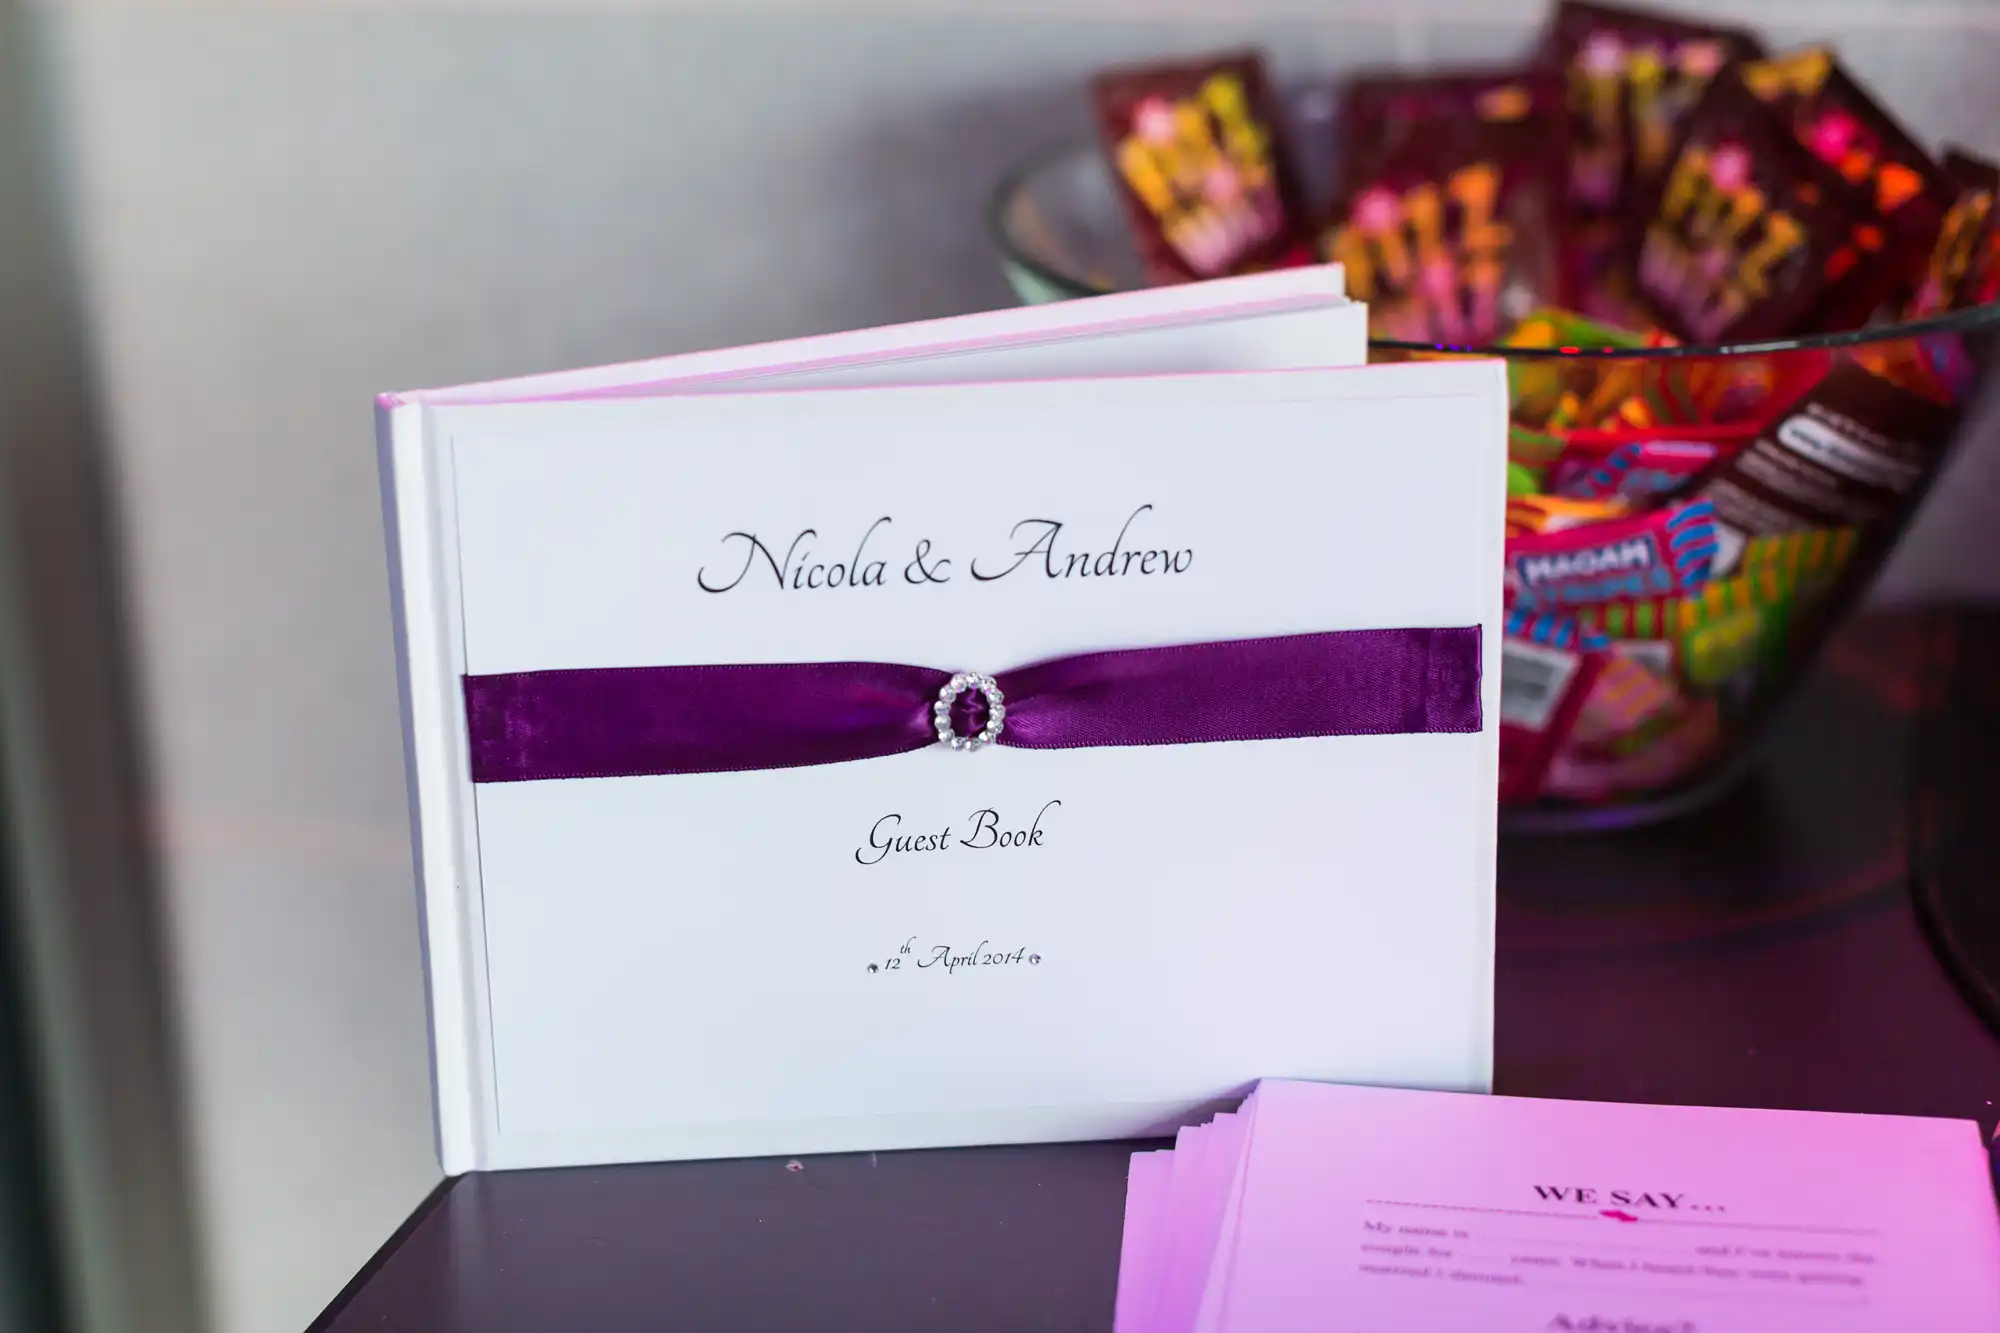 A guest book with "nicola & andrew" in purple text, a purple band and a faux diamond decoration, next to a bowl of wrapped candies.